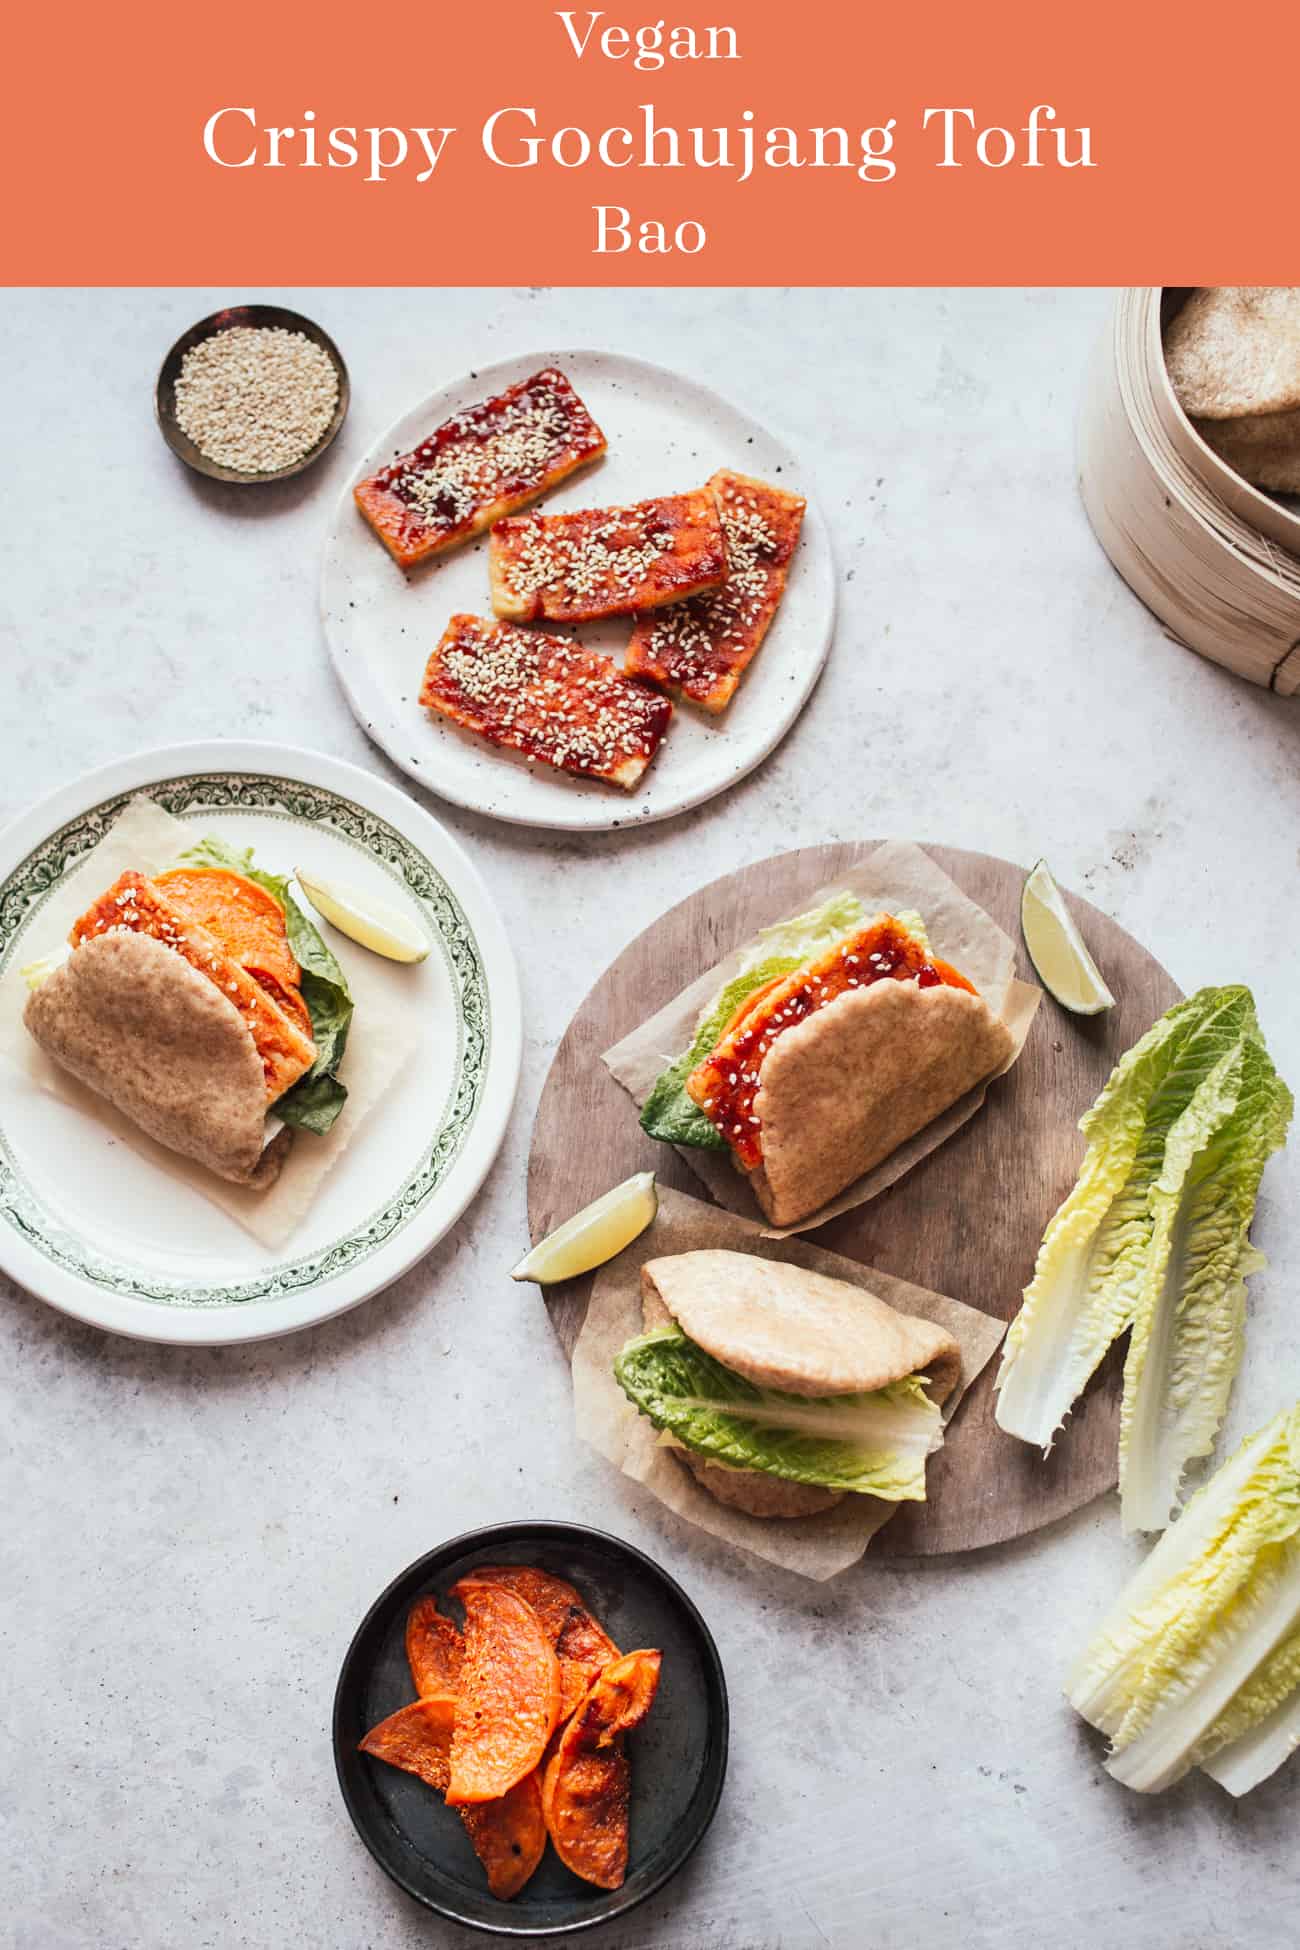 Bao buns filled with crispy gochujang tofu and lettuce with a bamboo steamer" data-pin-description="Crispy tofu with a sweet & spicy gochujang sauce in soft, fluffy bao buns. Great for a plant-based dinner!